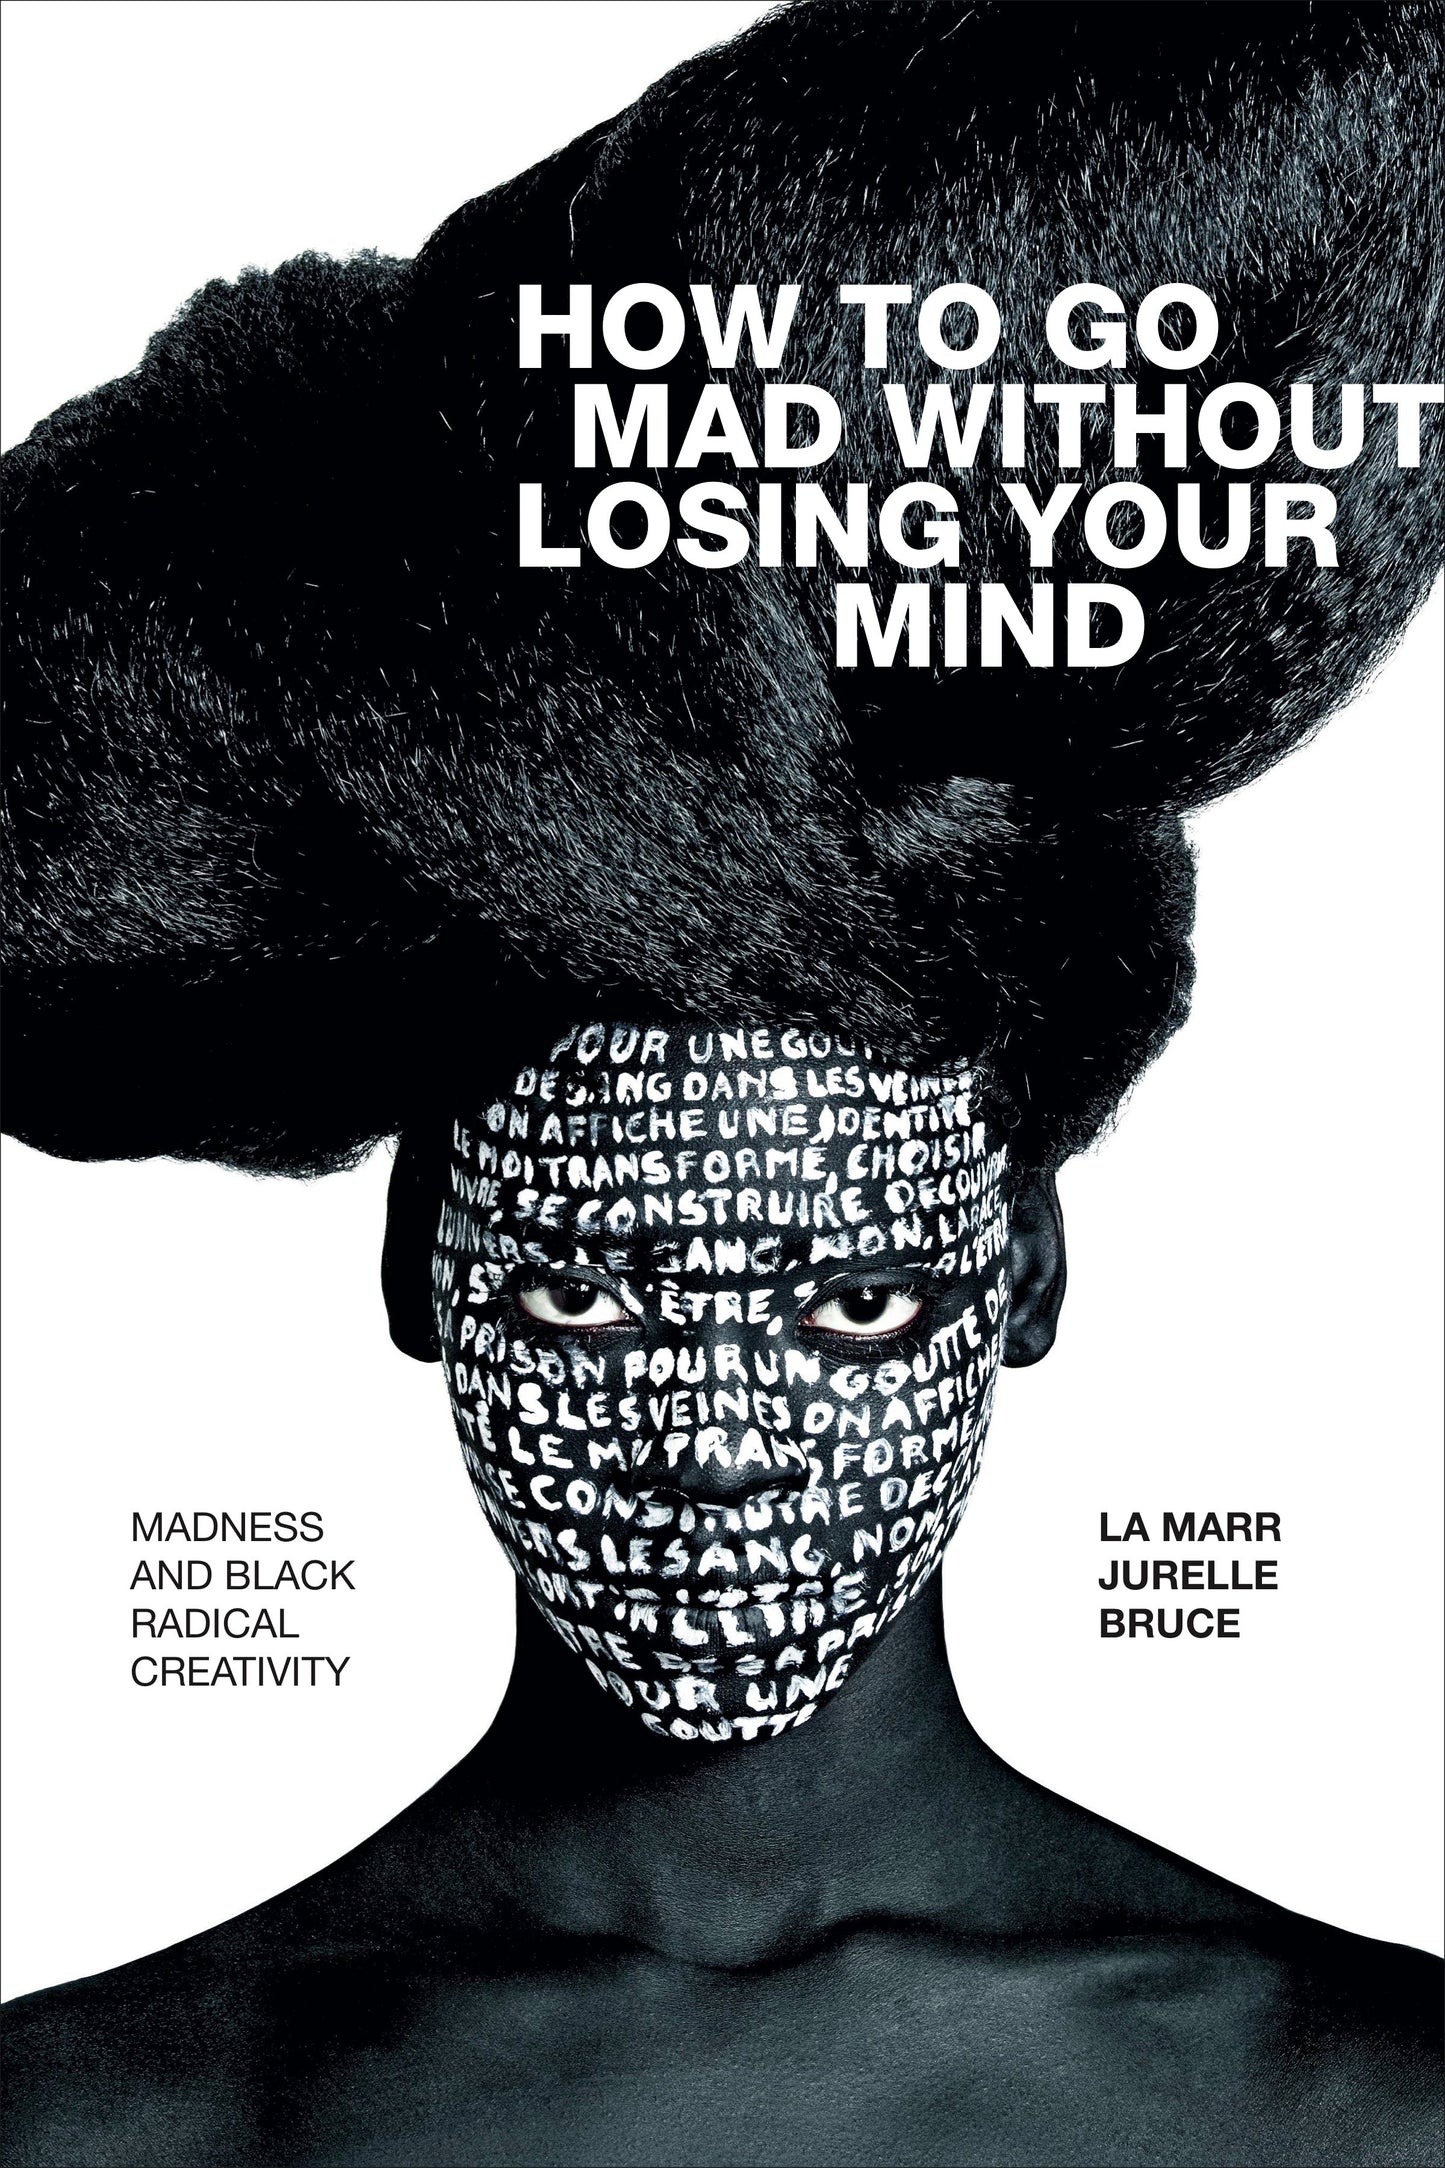 How to Go Mad without Losing Your Mind // Madness and Black Radical Creativity